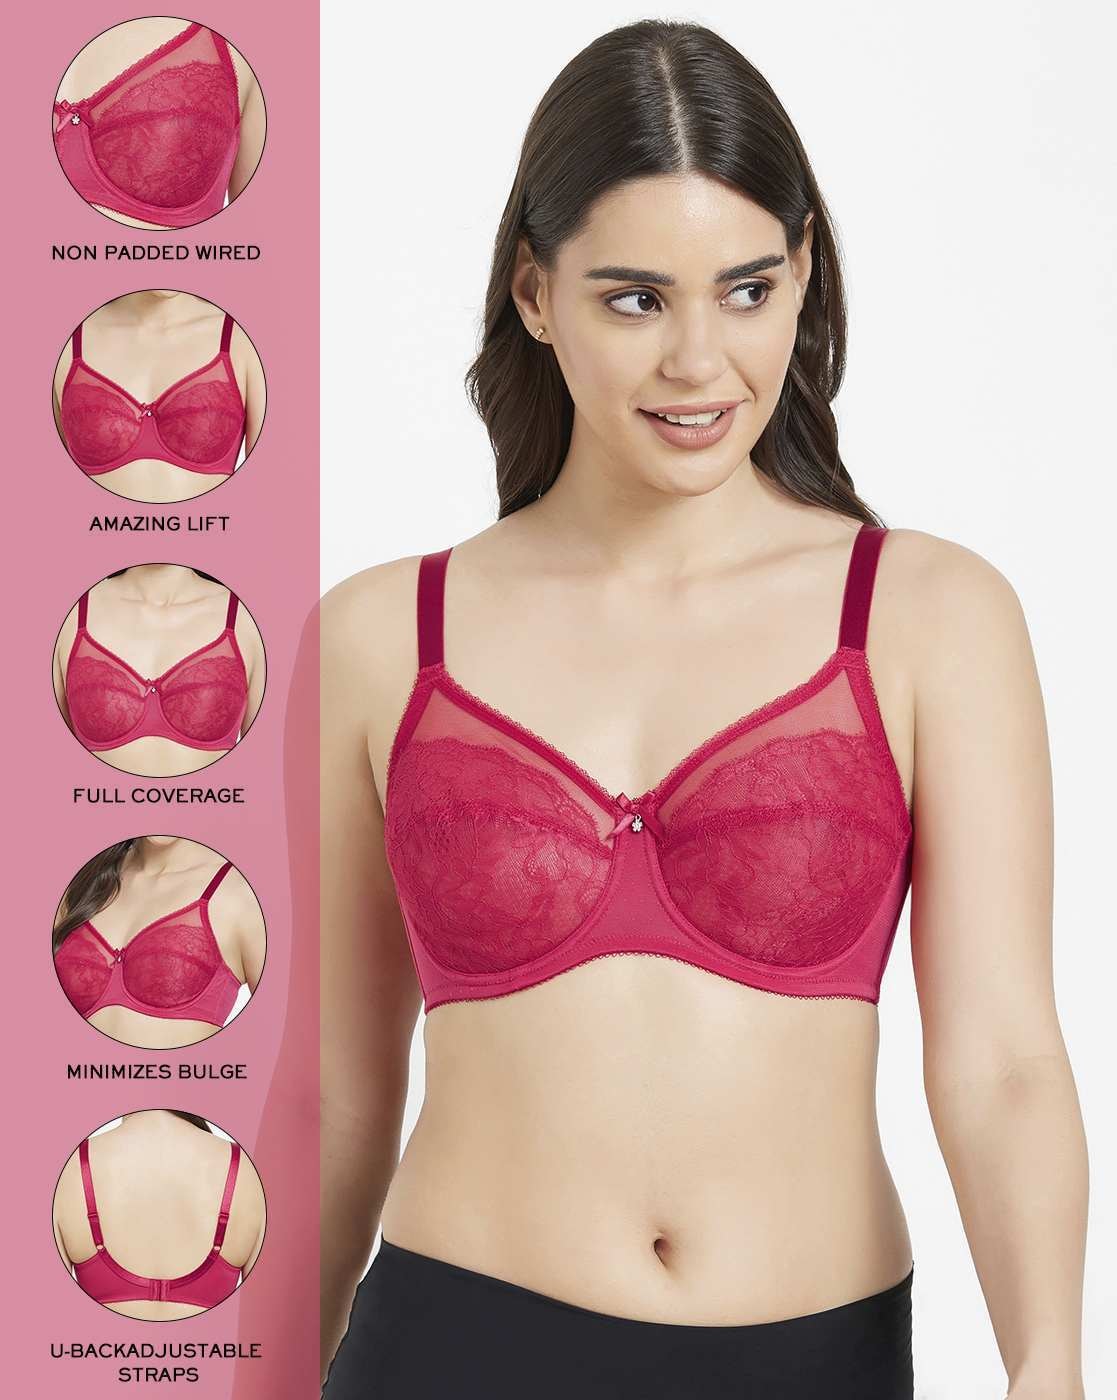 Buy Ultimo Perfect Profile Minimizer Bra - Red Online